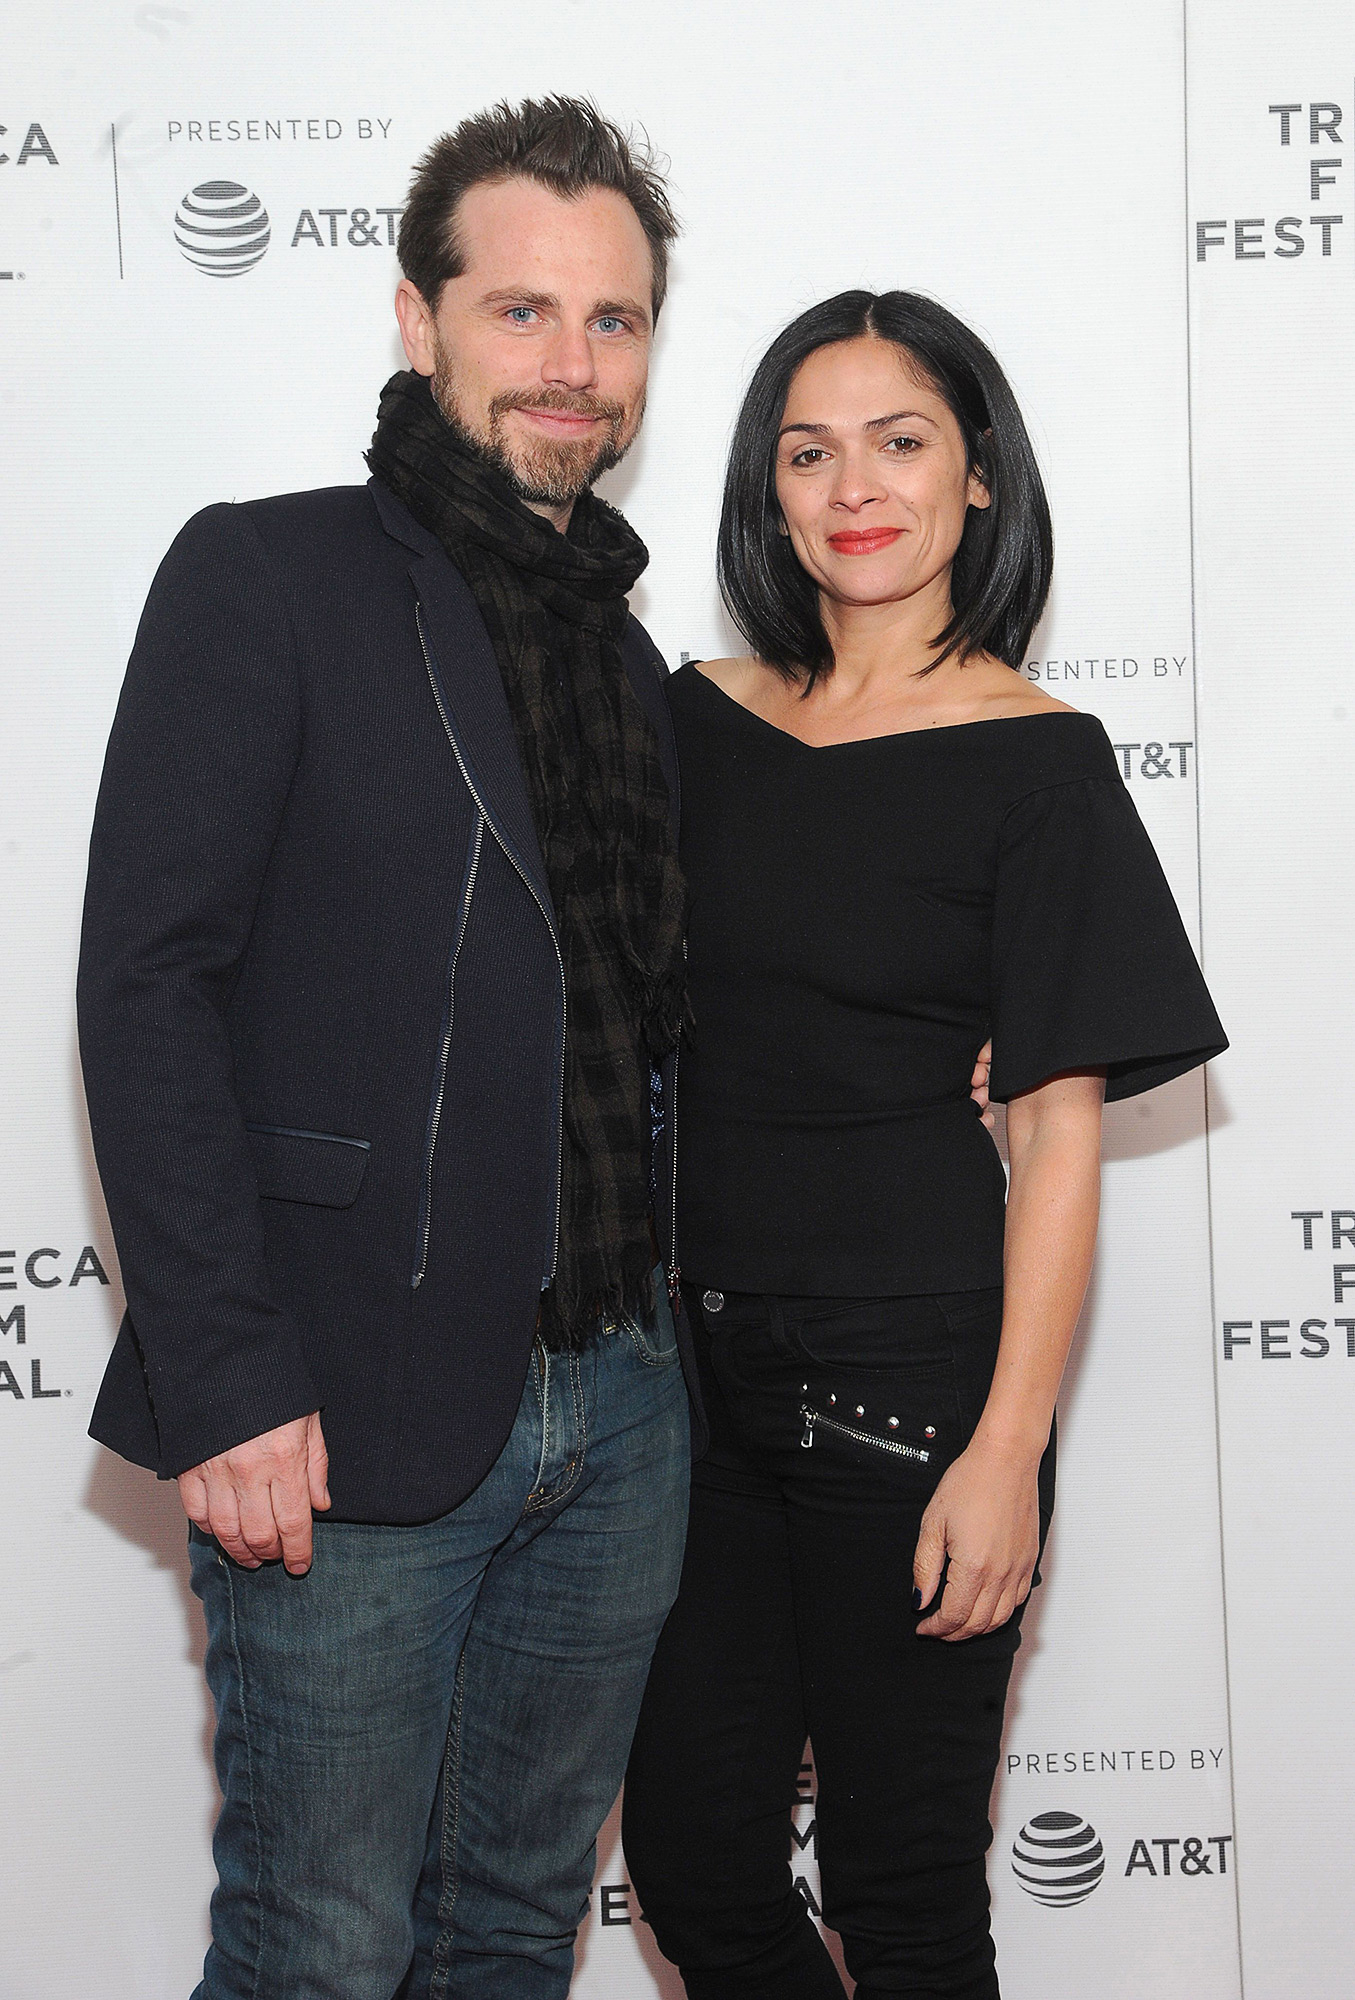 Boy Meets World's Rider Strong and Alexandra Barreto- A Timeline of Their Relationship - 014 'Safe Spaces' premiere, Tribeca Film Festival, New York, USA - 29 Apr 2019